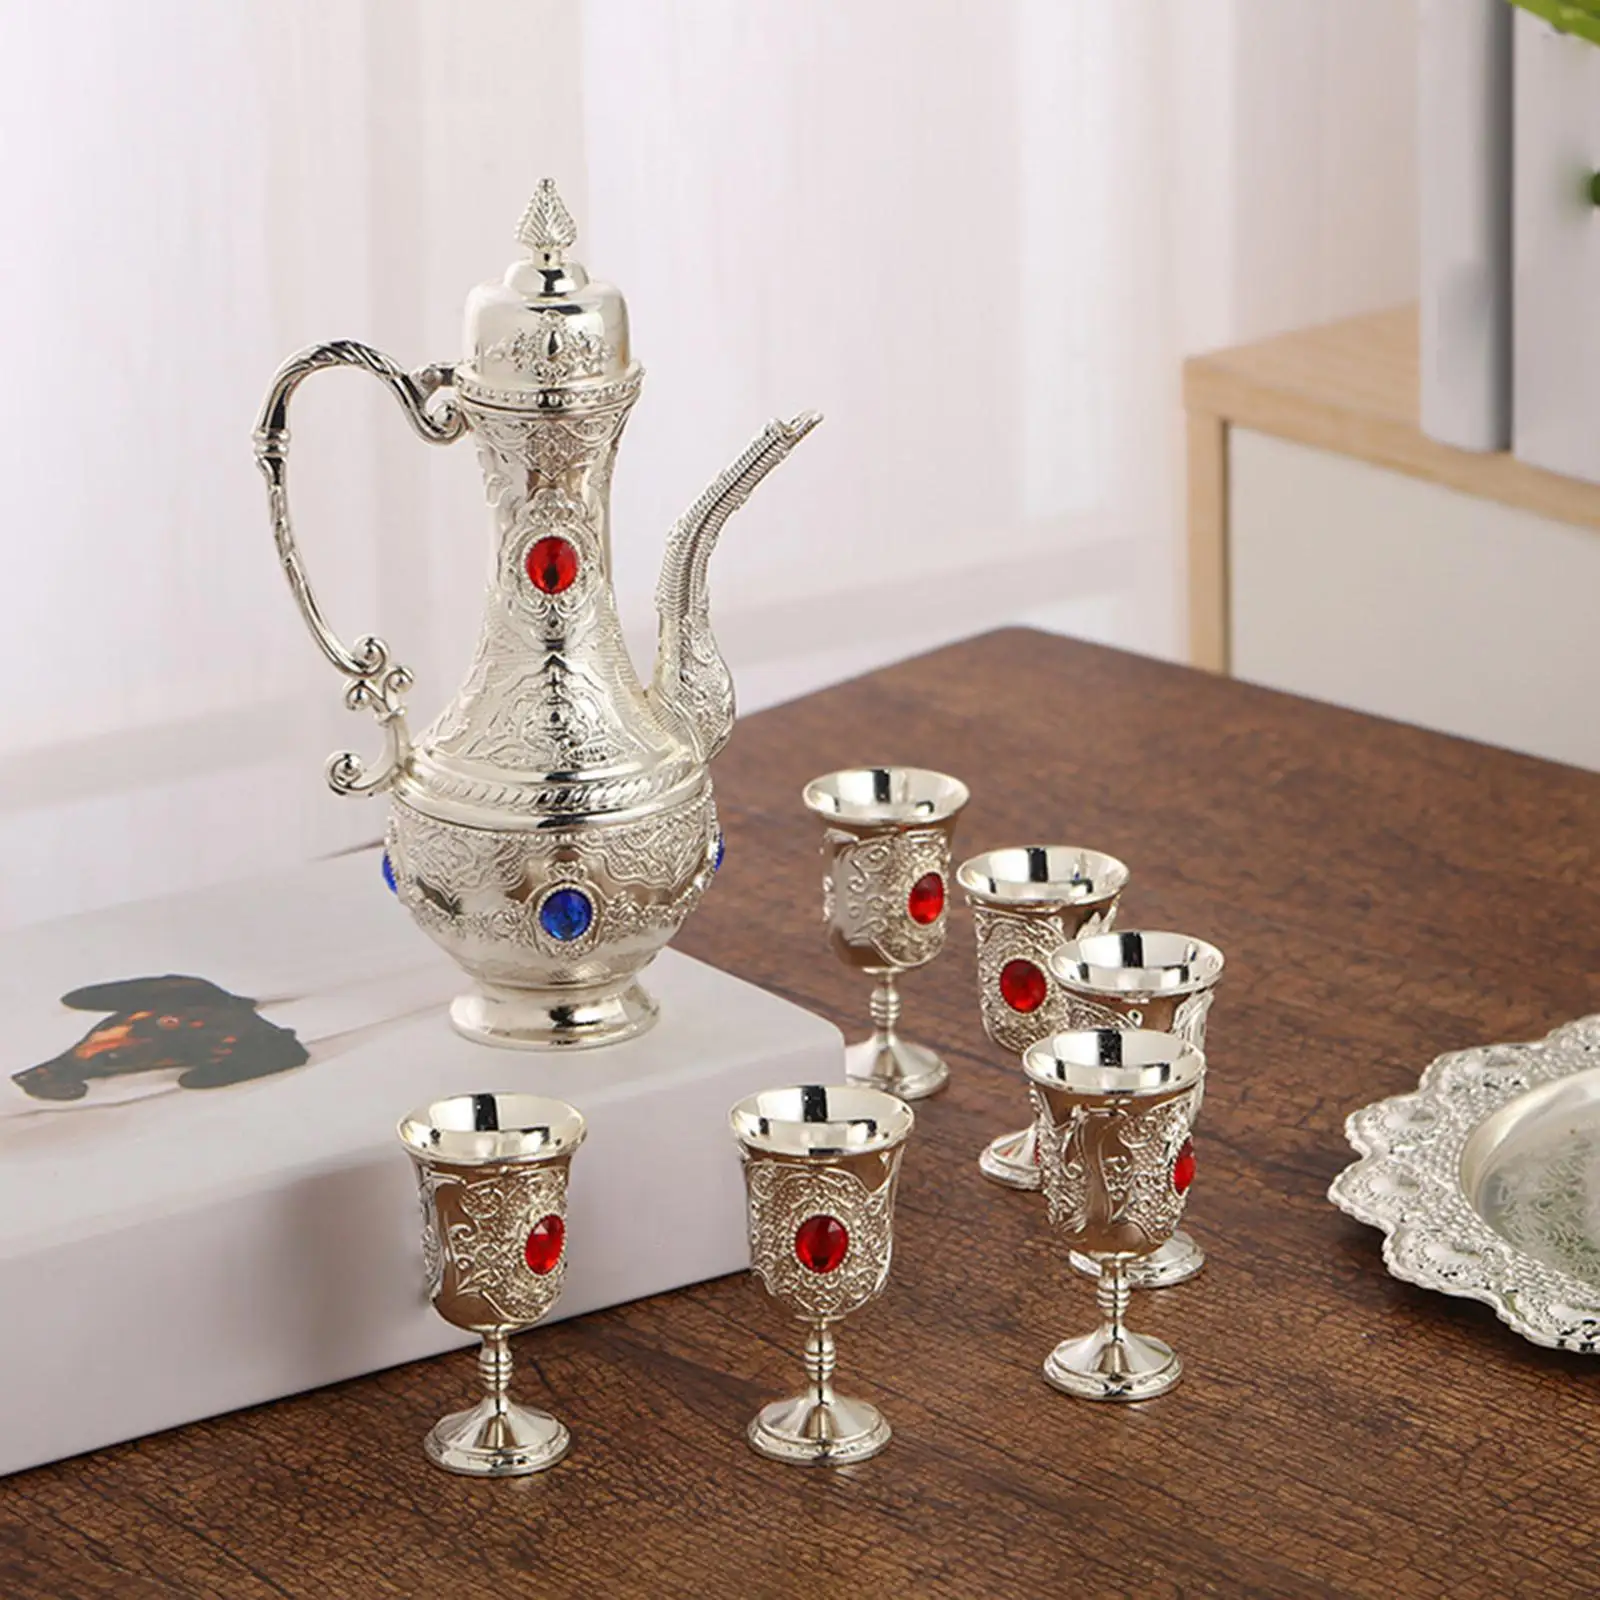 6Pcs Metal Wine Liquor Decanter Set with Tray Wine Glass Jug Set for Table Decoration